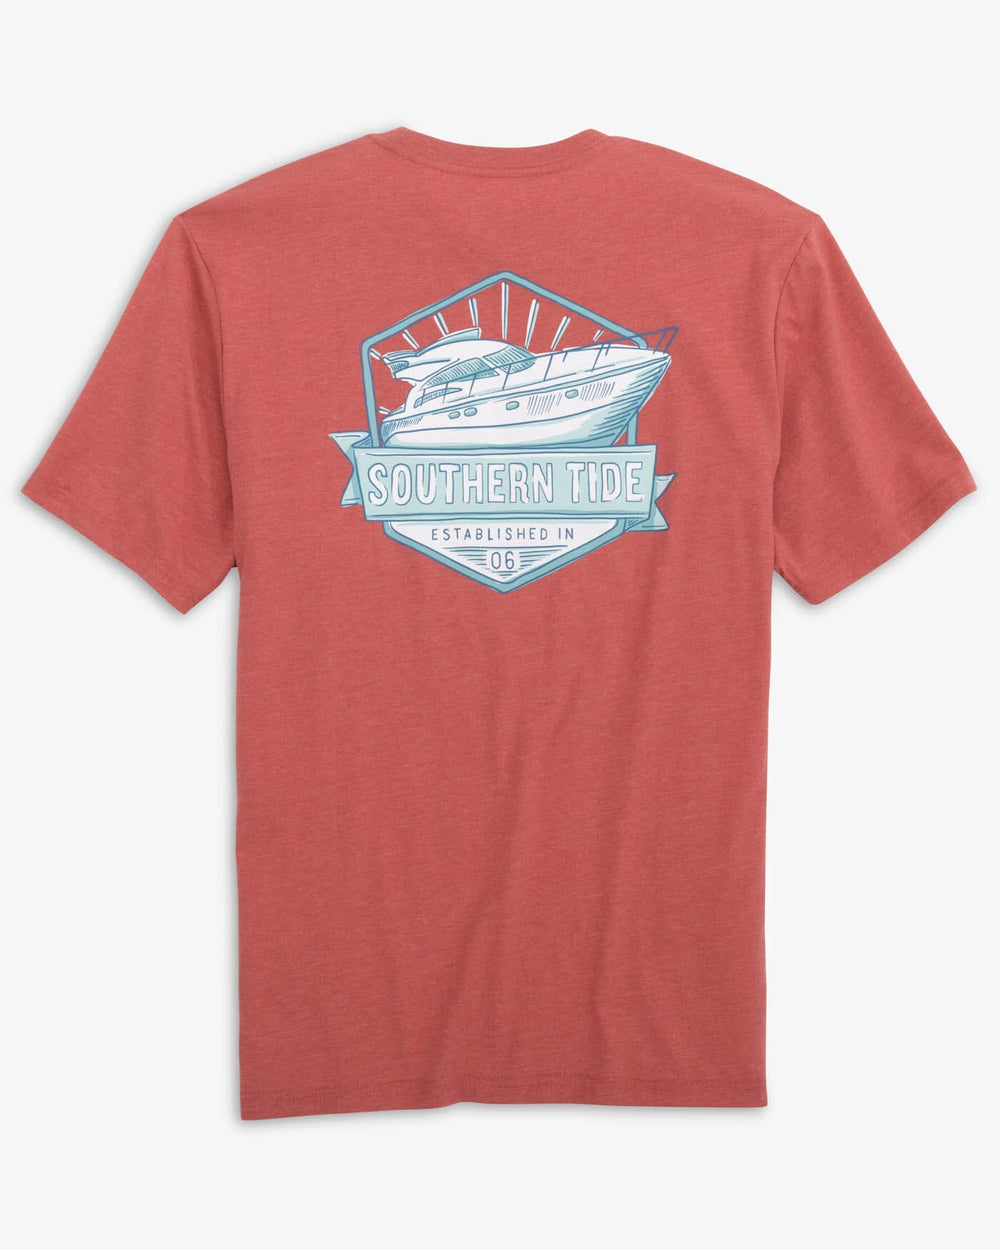 The back view of the Southern Tide Heather Southern Tide Cruise T-Shirt by Southern Tide - Heather Dusty Coral